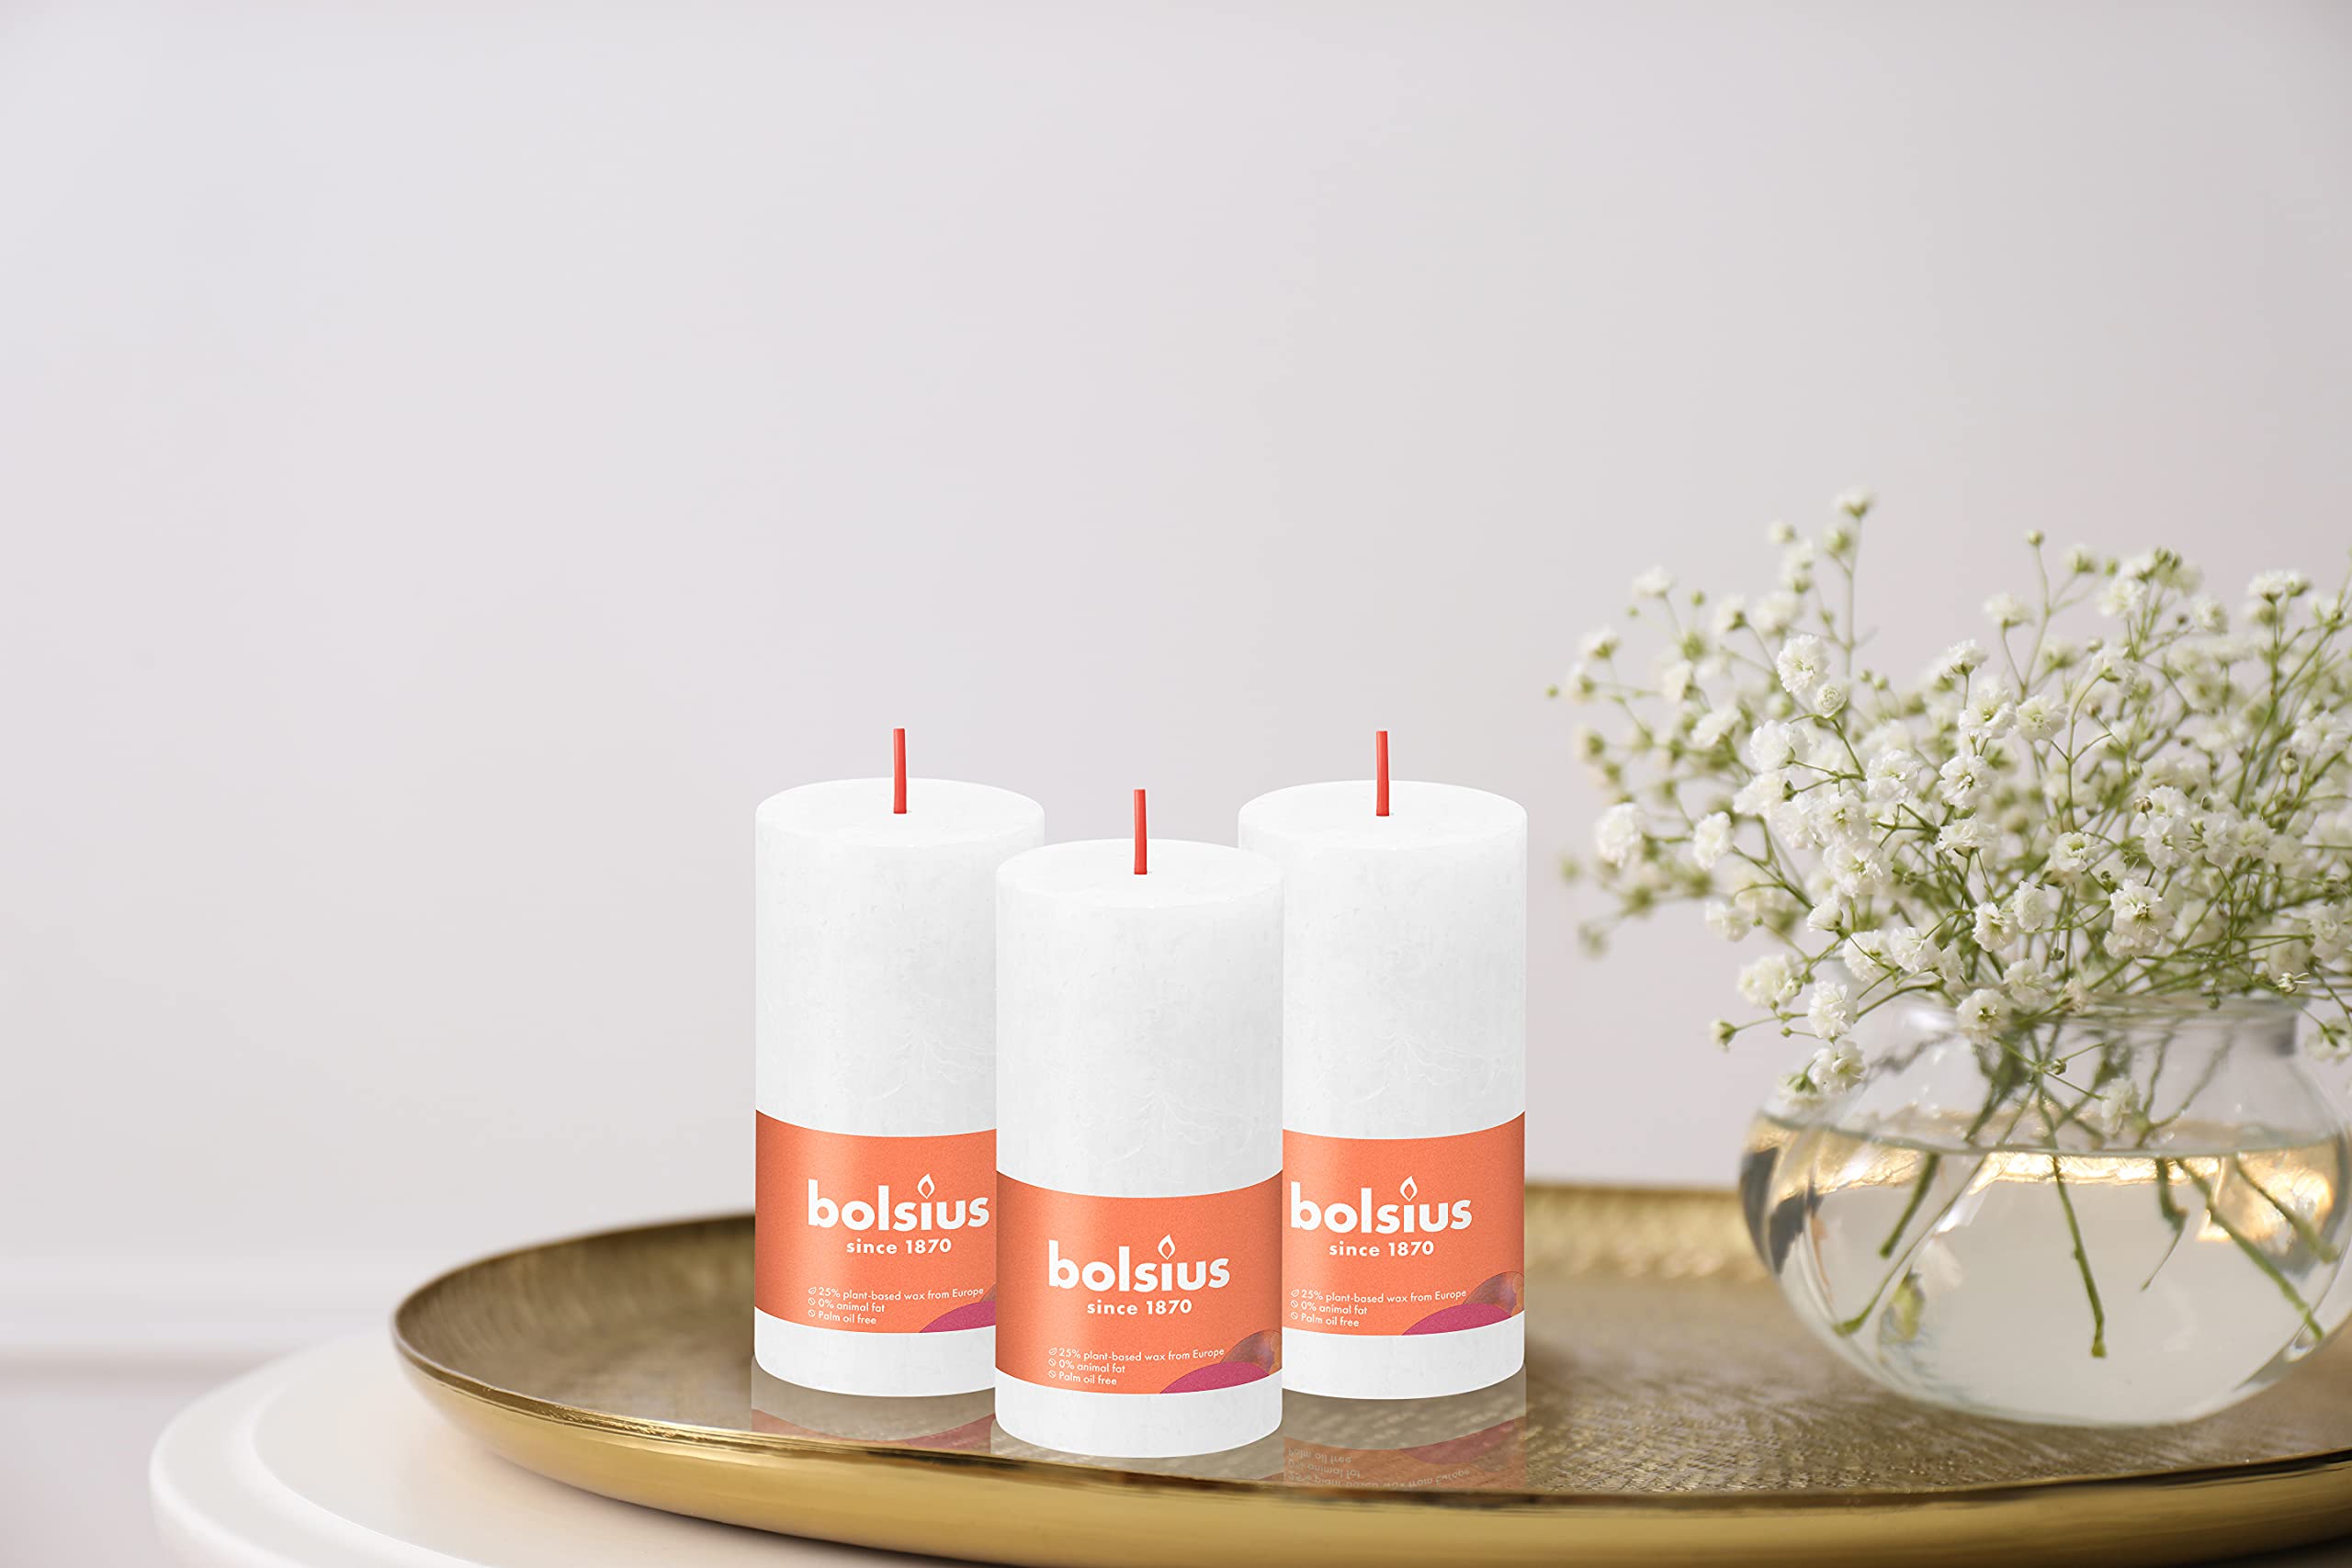 BOLSIUS 4 Pack White Rustic Pillar Candles - 2 X 4 Inches - Premium European Quality - Includes Natural Plant-Based Wax - Unscented Dripless Smokeless 30 Hour Party D�cor and Wedding Candles  - Very Good